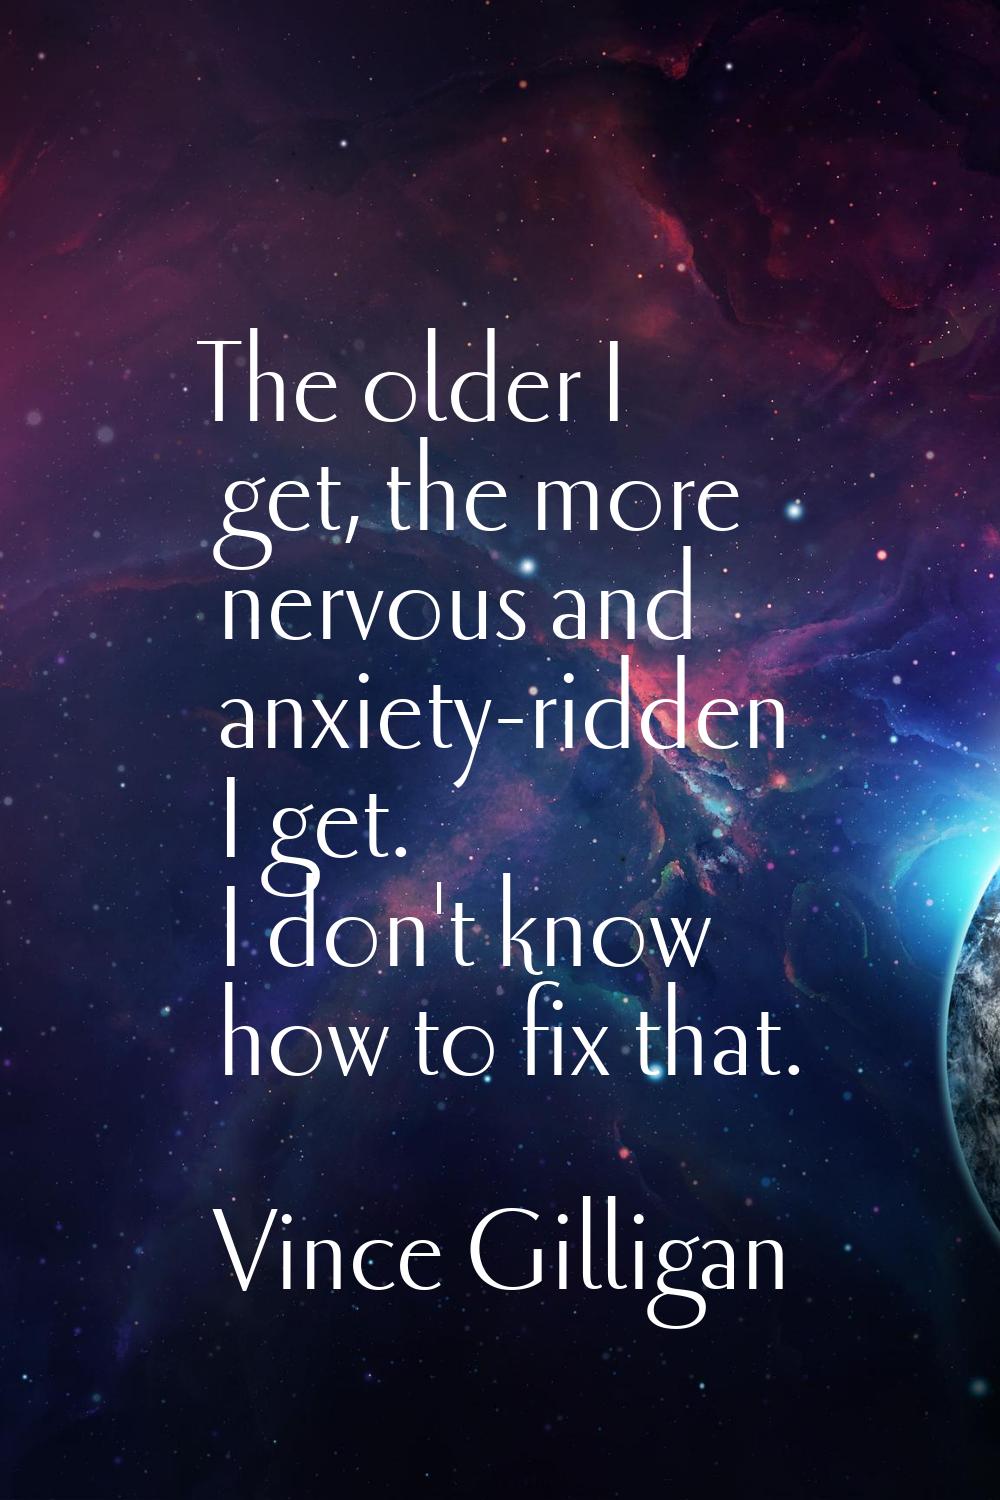 The older I get, the more nervous and anxiety-ridden I get. I don't know how to fix that.